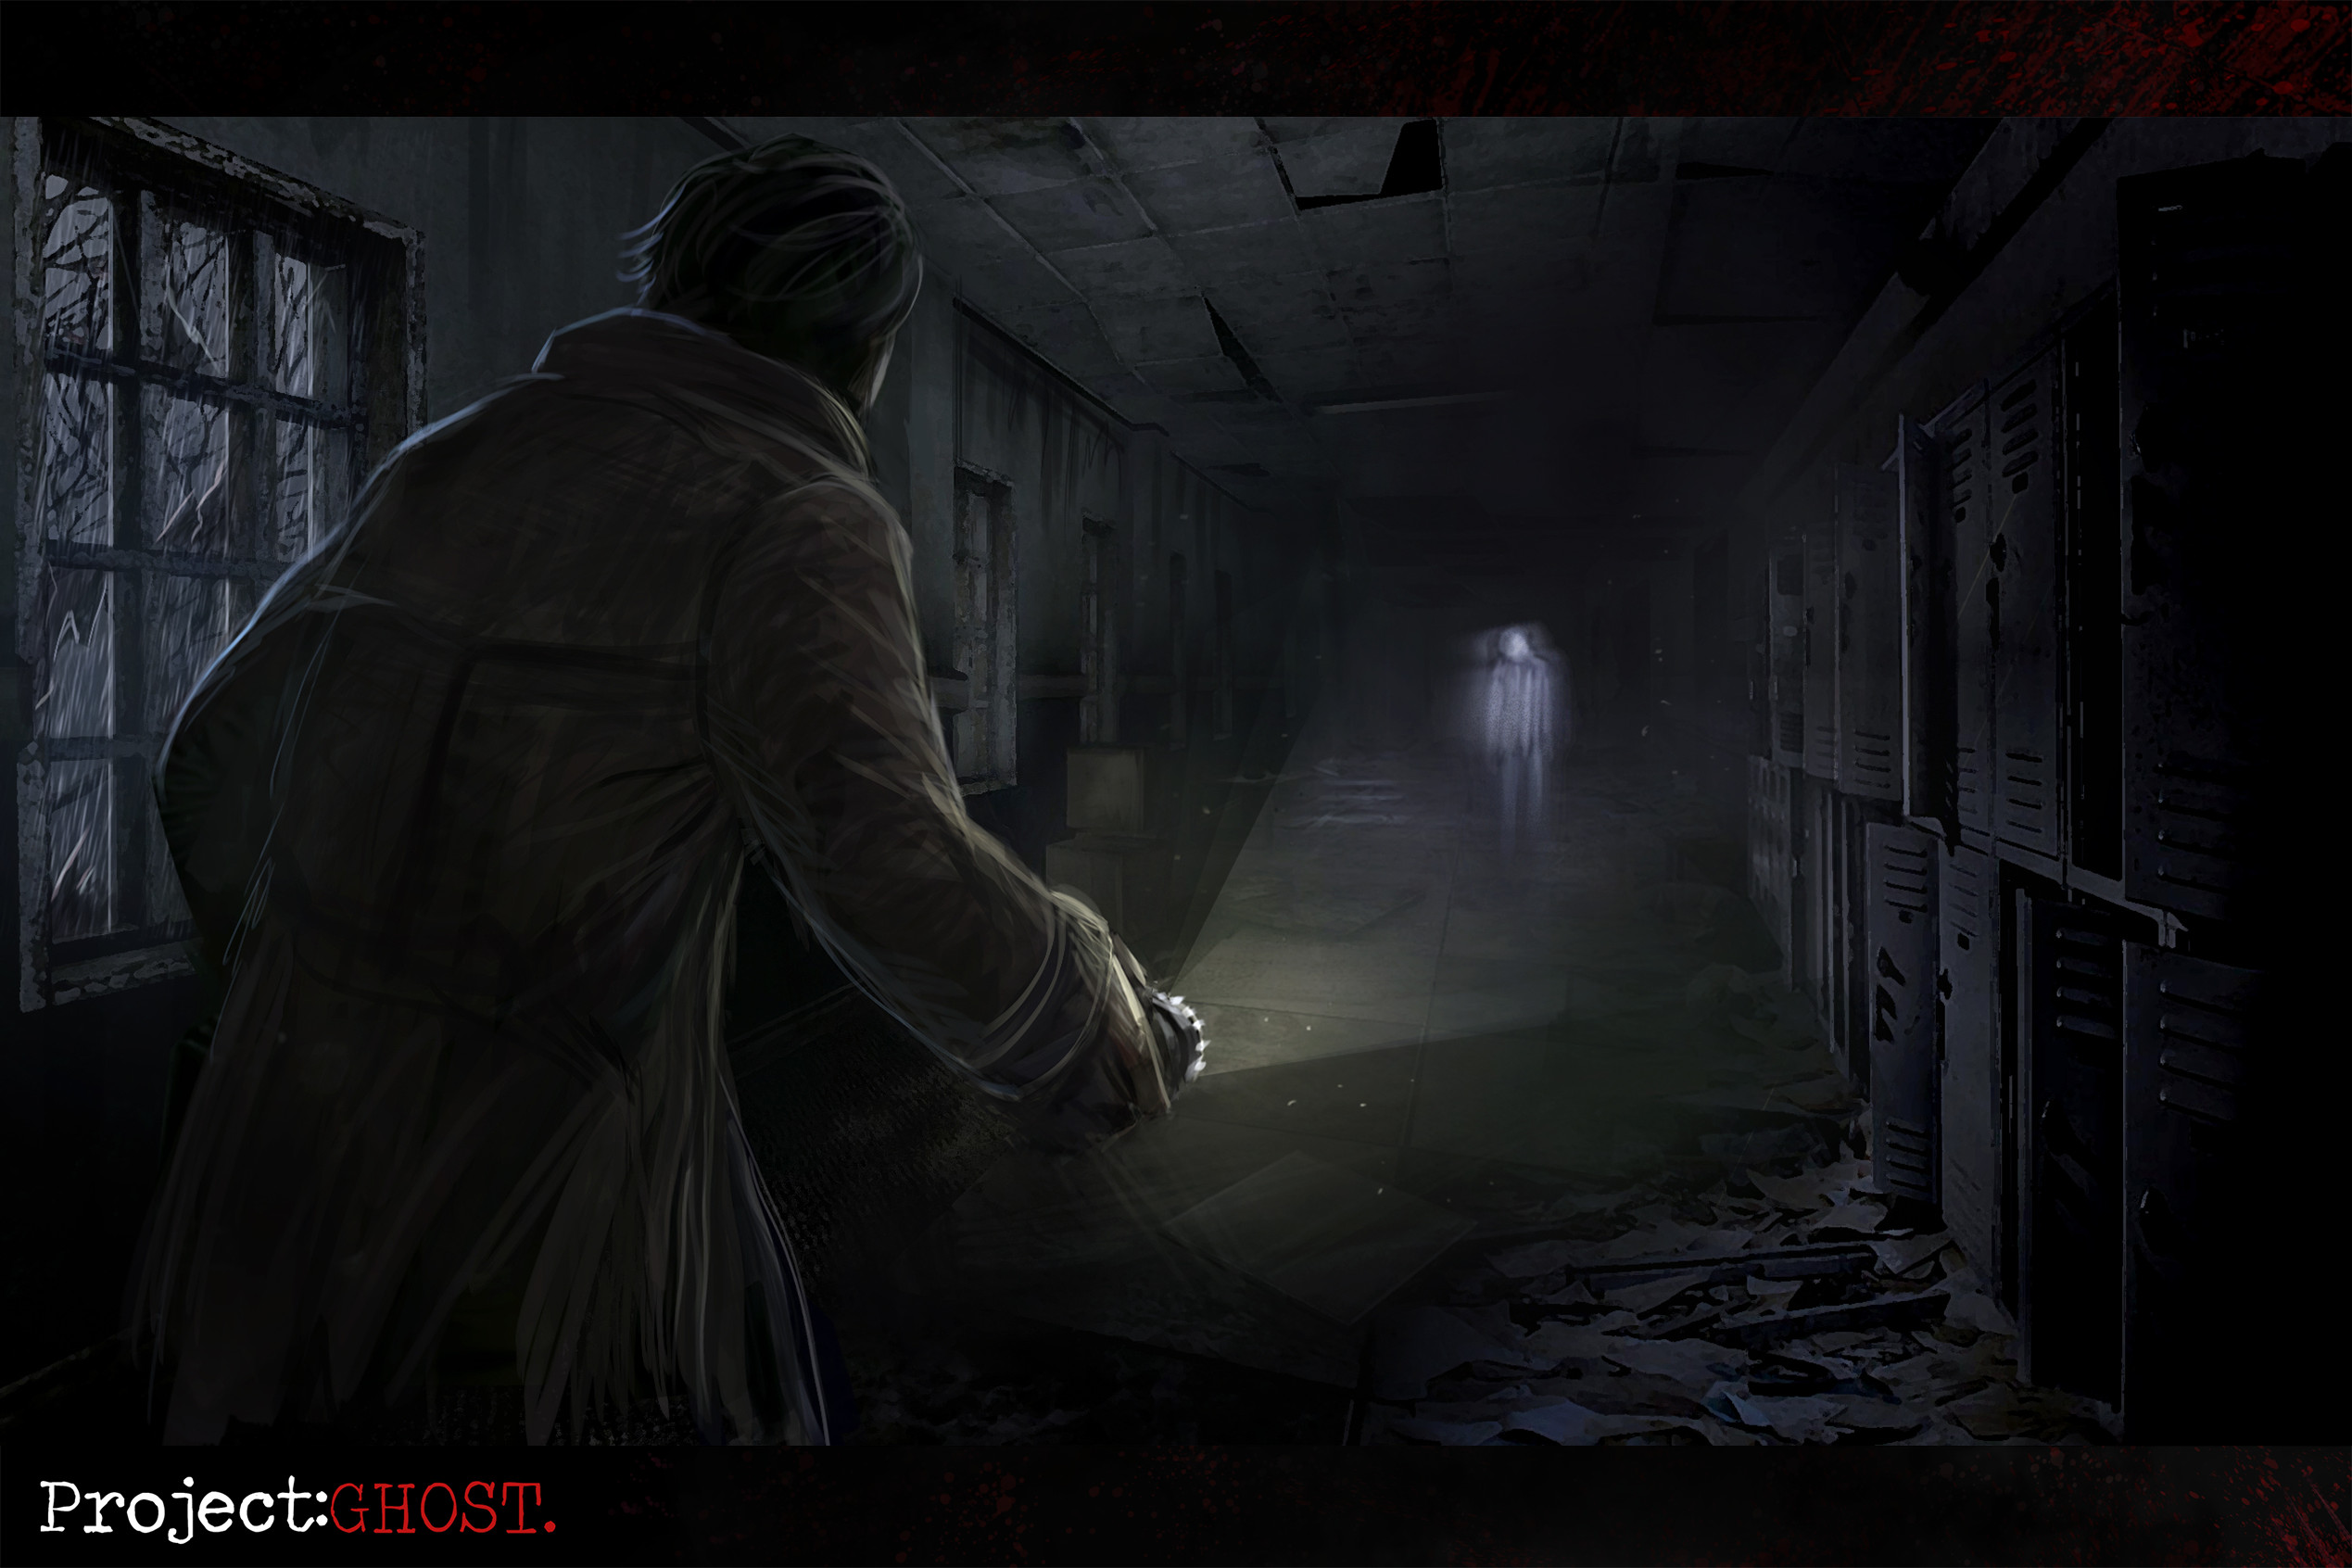 Thumbnail 5: Flynn's ghost reveals himself to Peter in a school corridor, wishing to help him. 